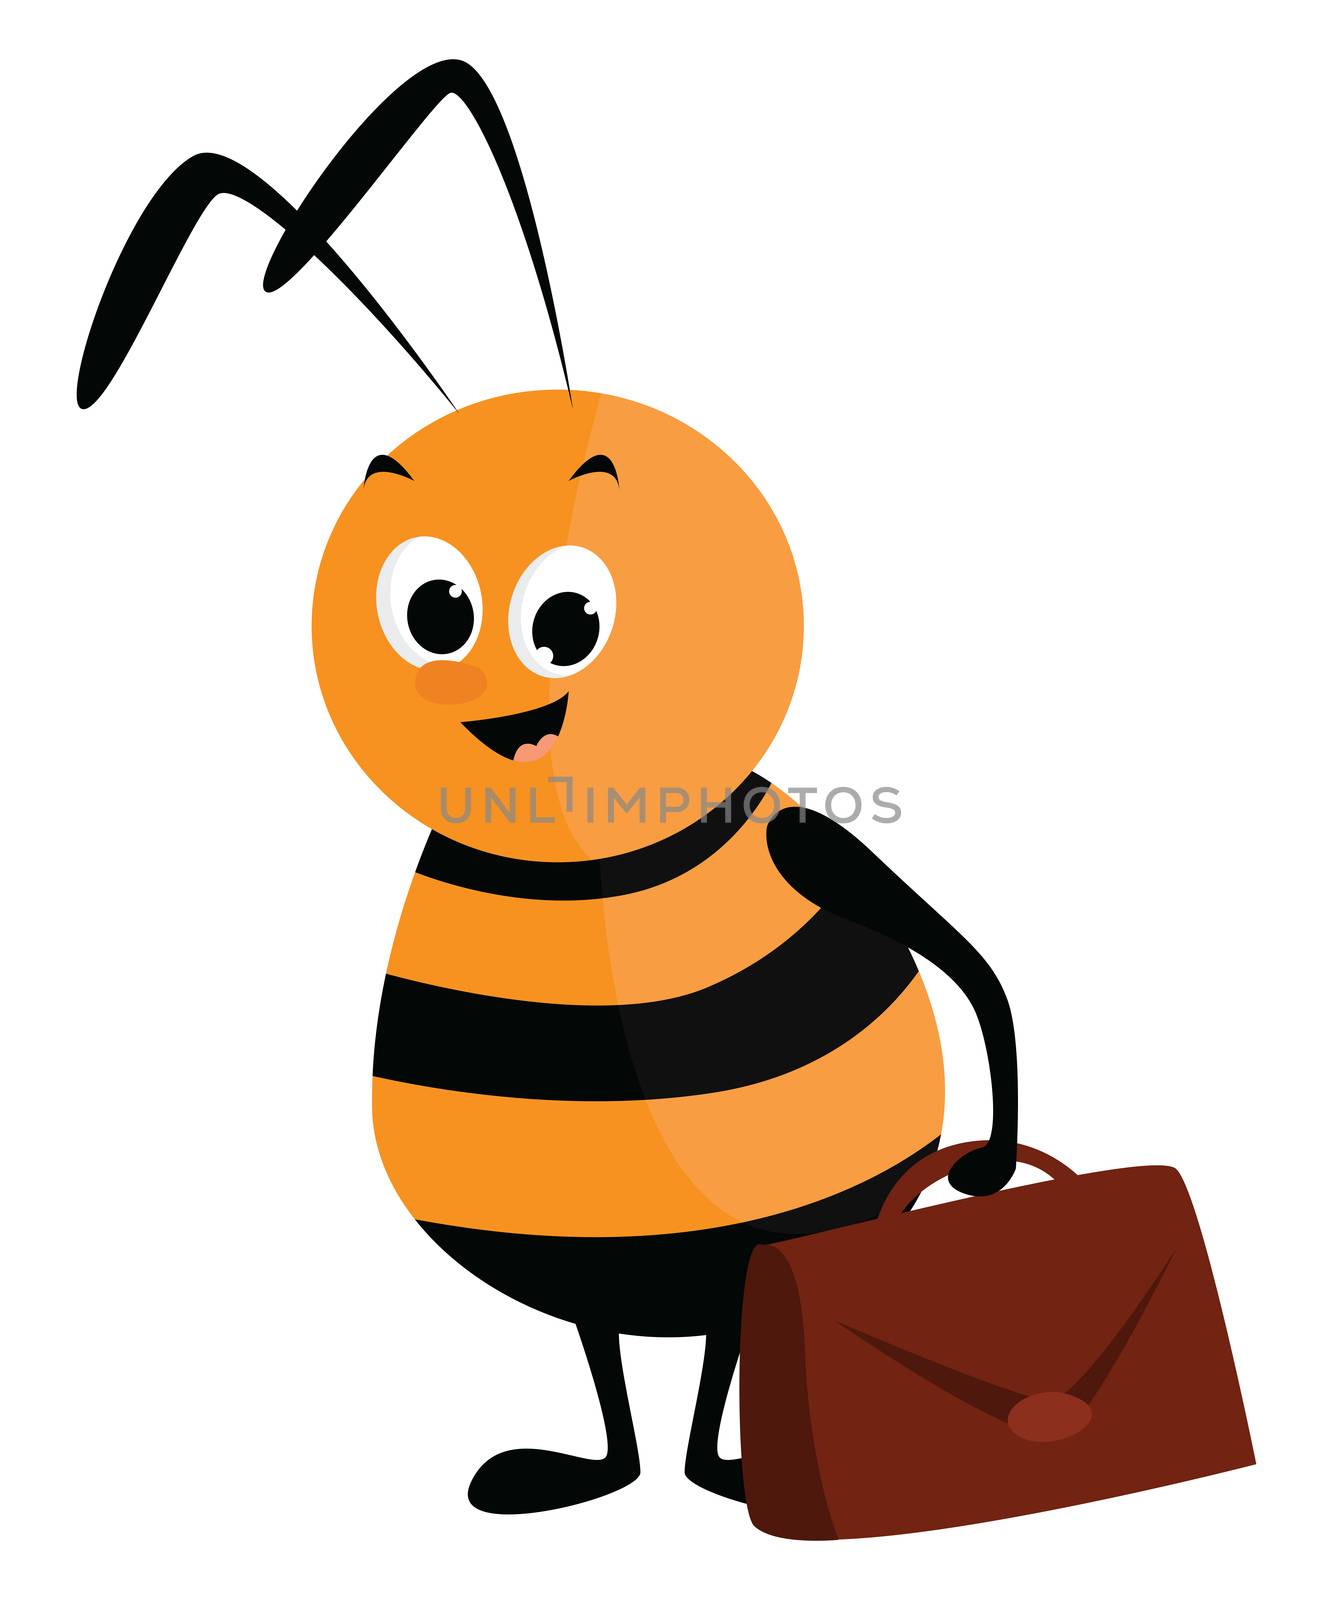 Working bee , illustration, vector on white background